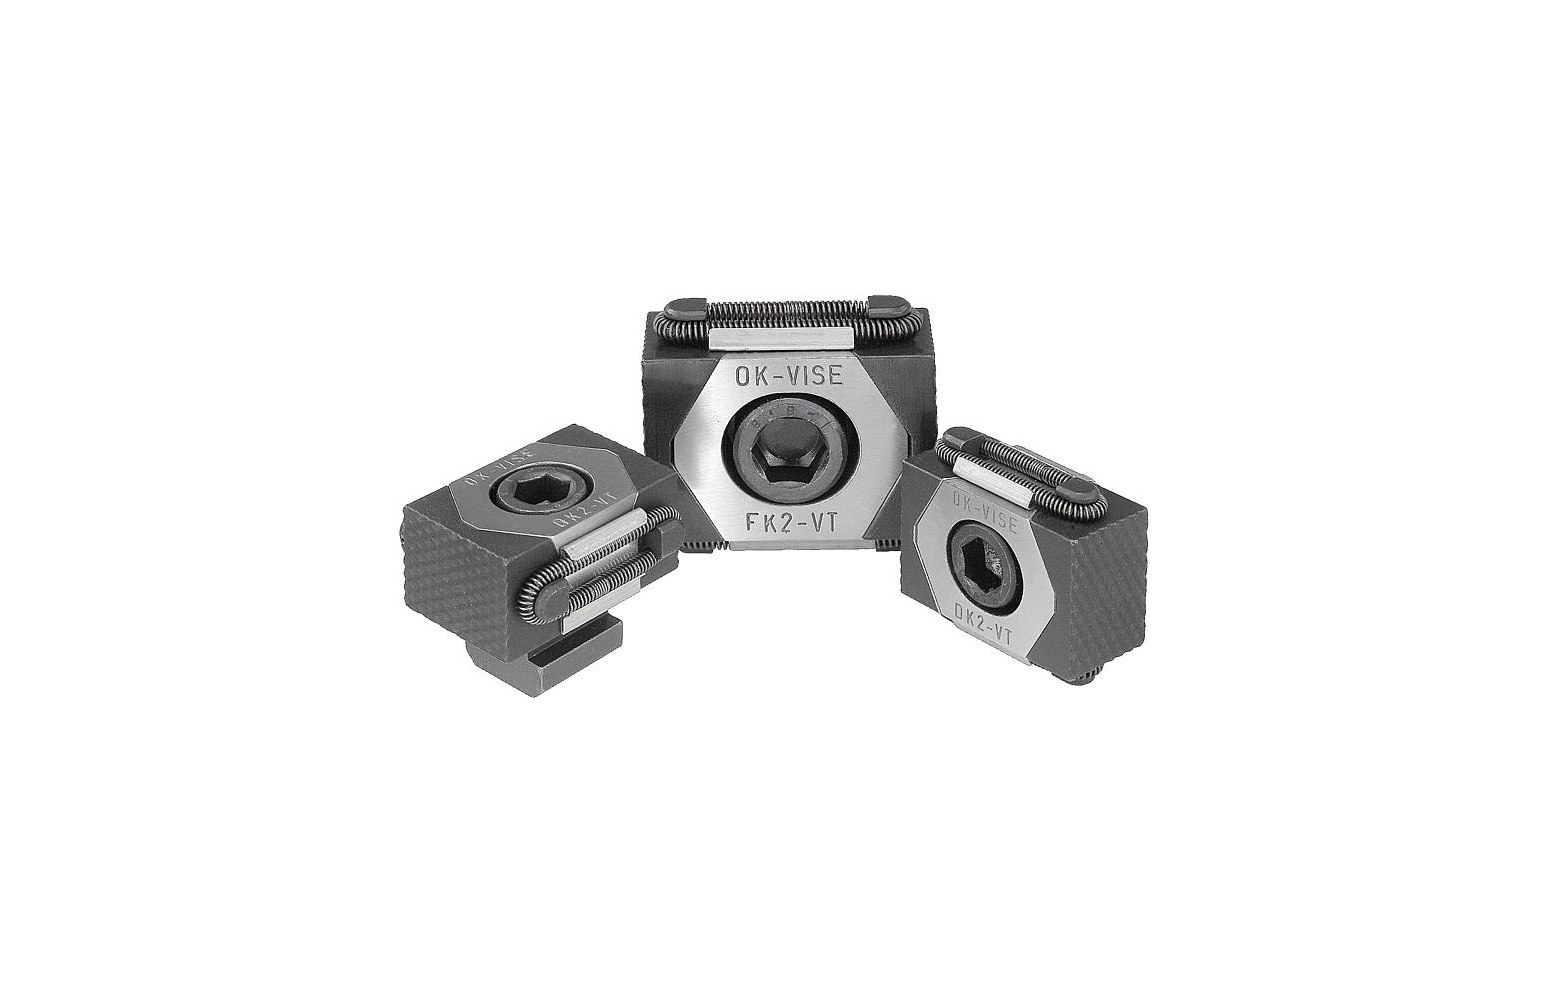 K0040 Wedge clamps jaw faces serrated